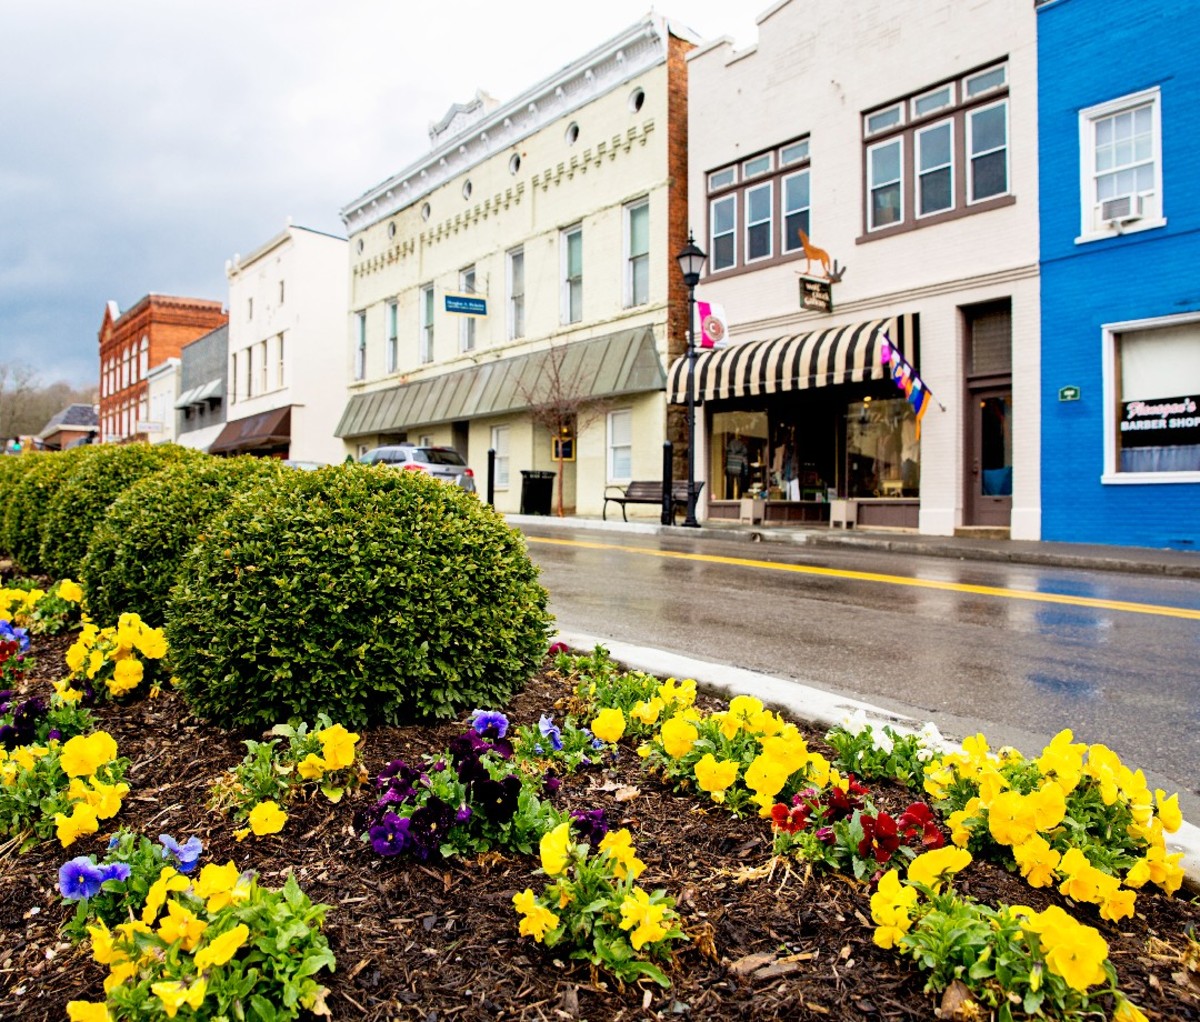 A view of the main street of Lewisburg, West Virginia. Flowers are in the foreground and local businesses line the street.